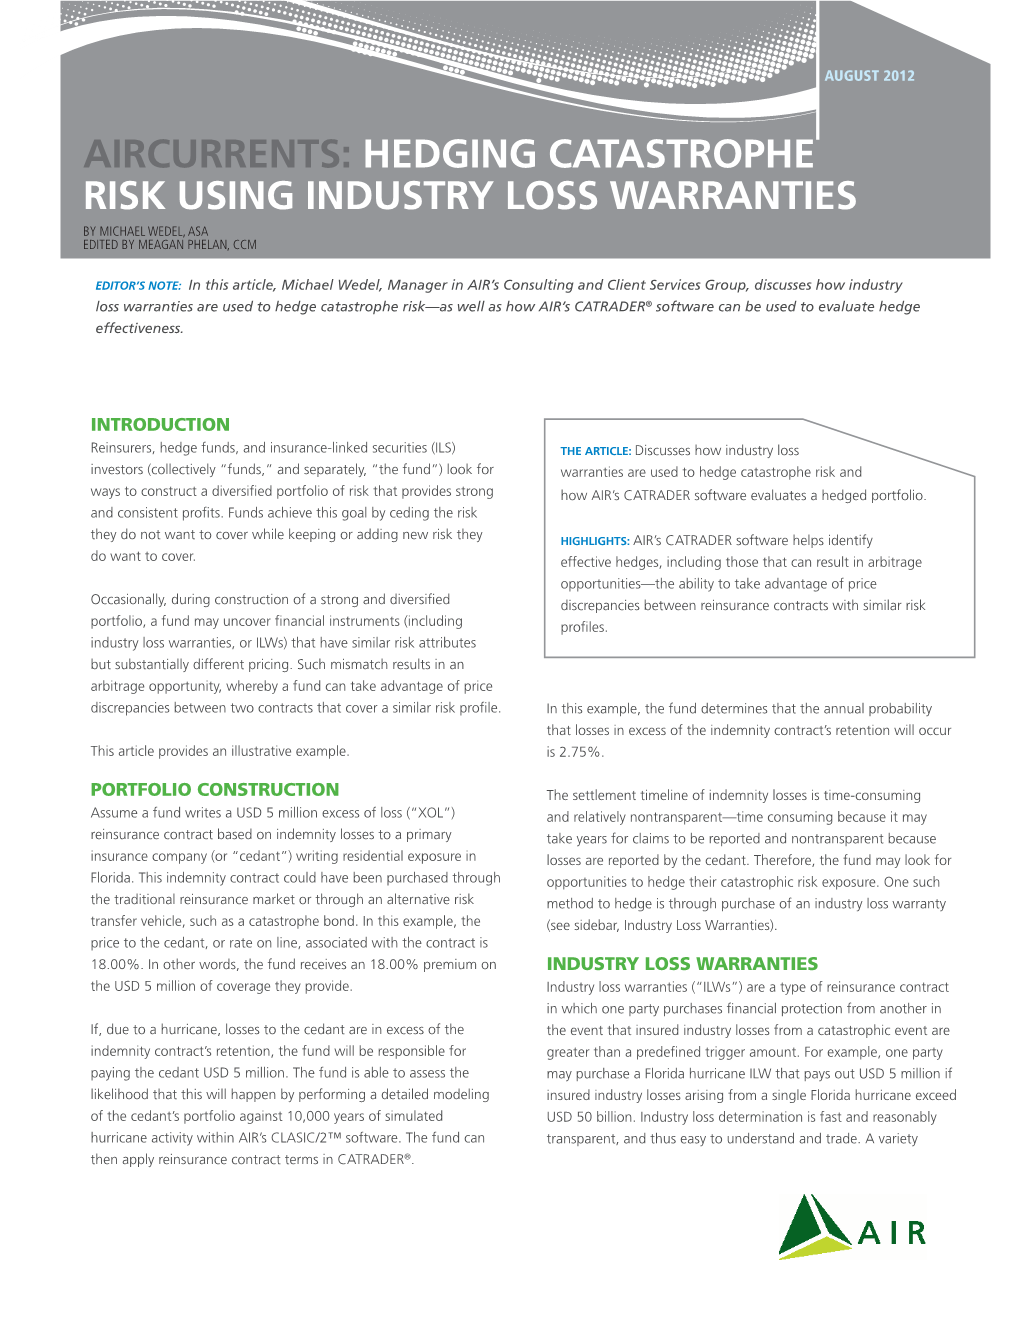 Hedging Catastrophe Risk Using Industry Loss